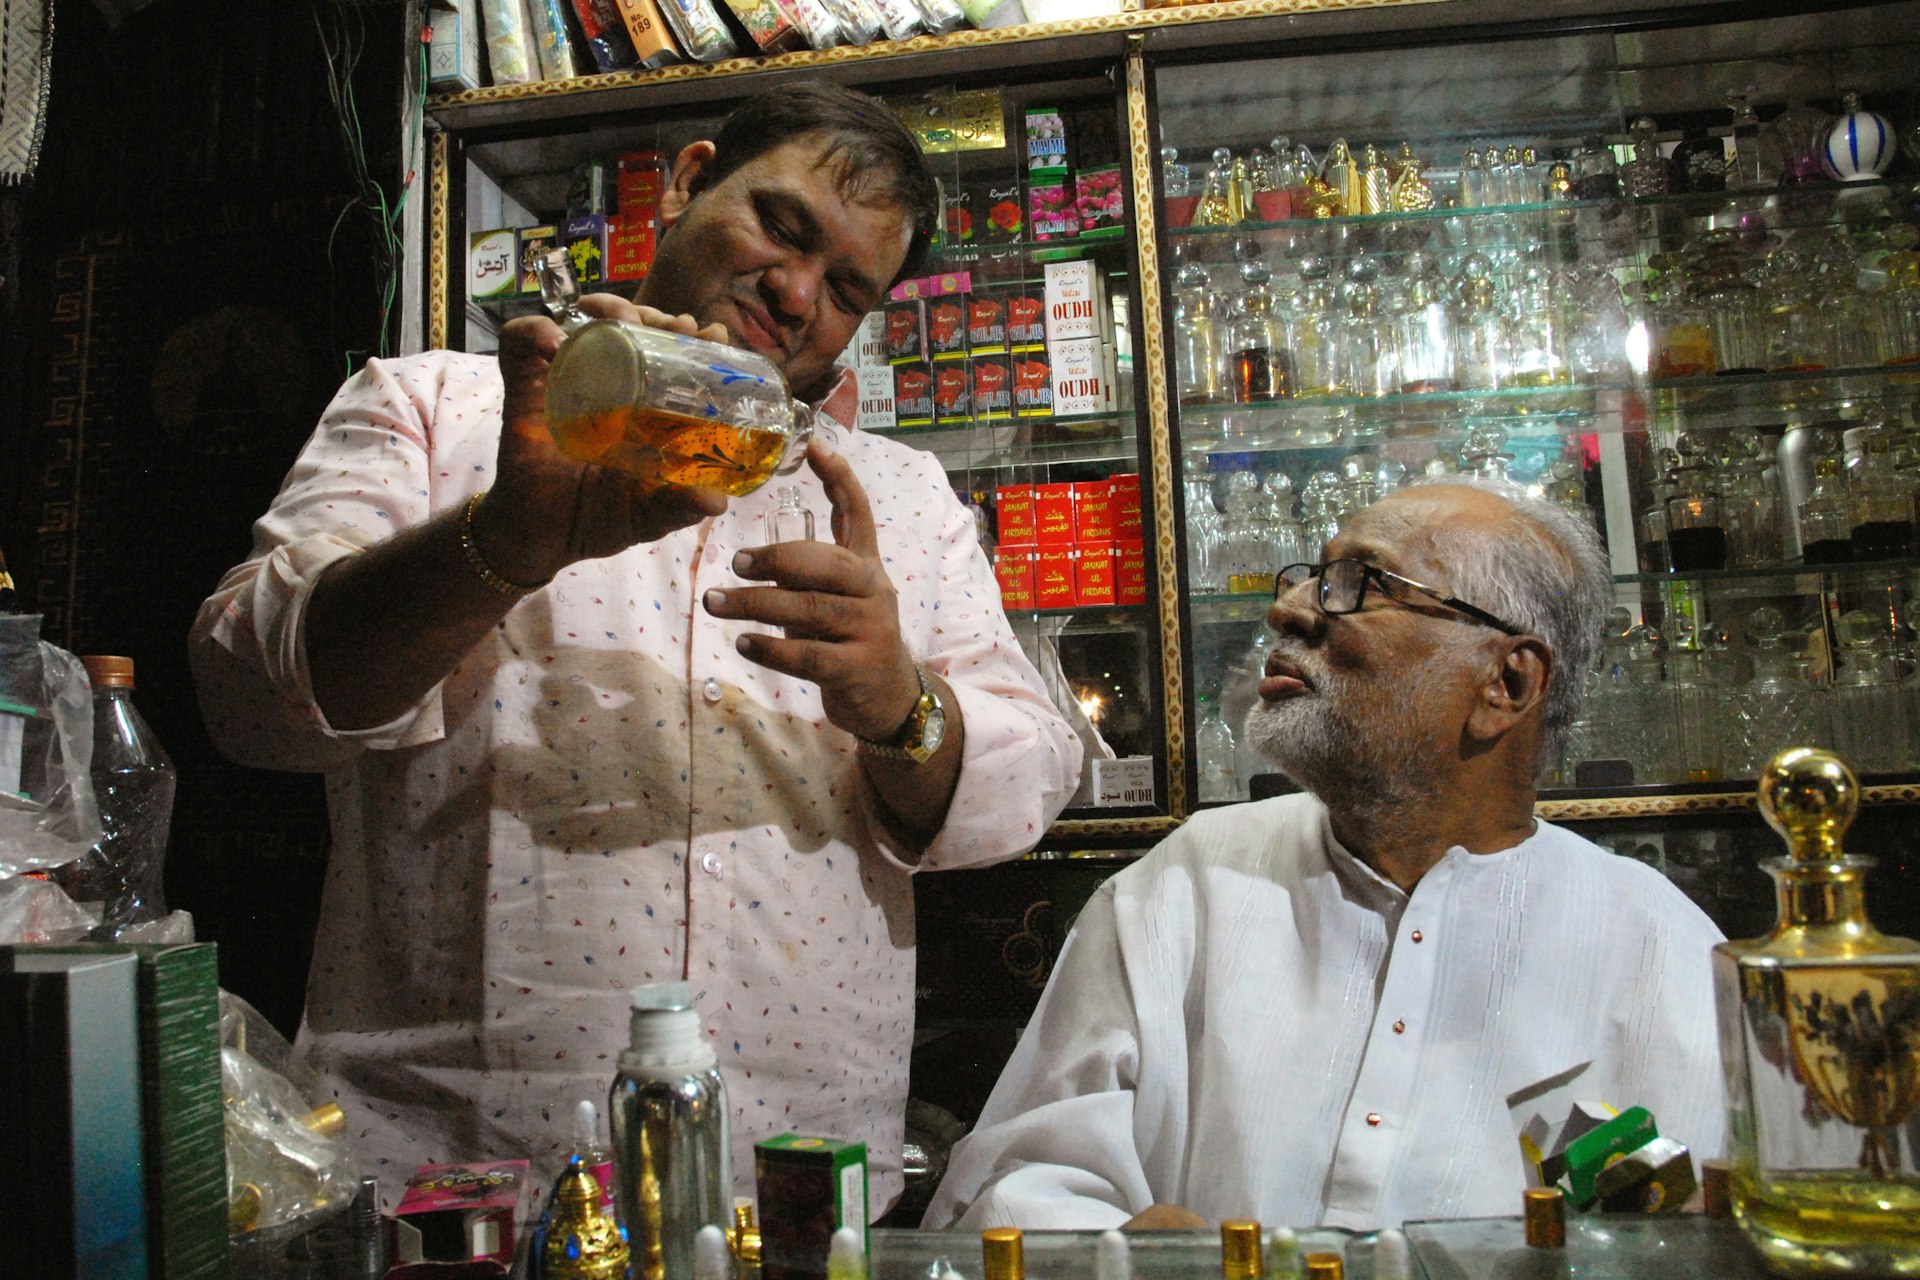 Ittar-wallahs mix fragrances in the old city of Hyderabad